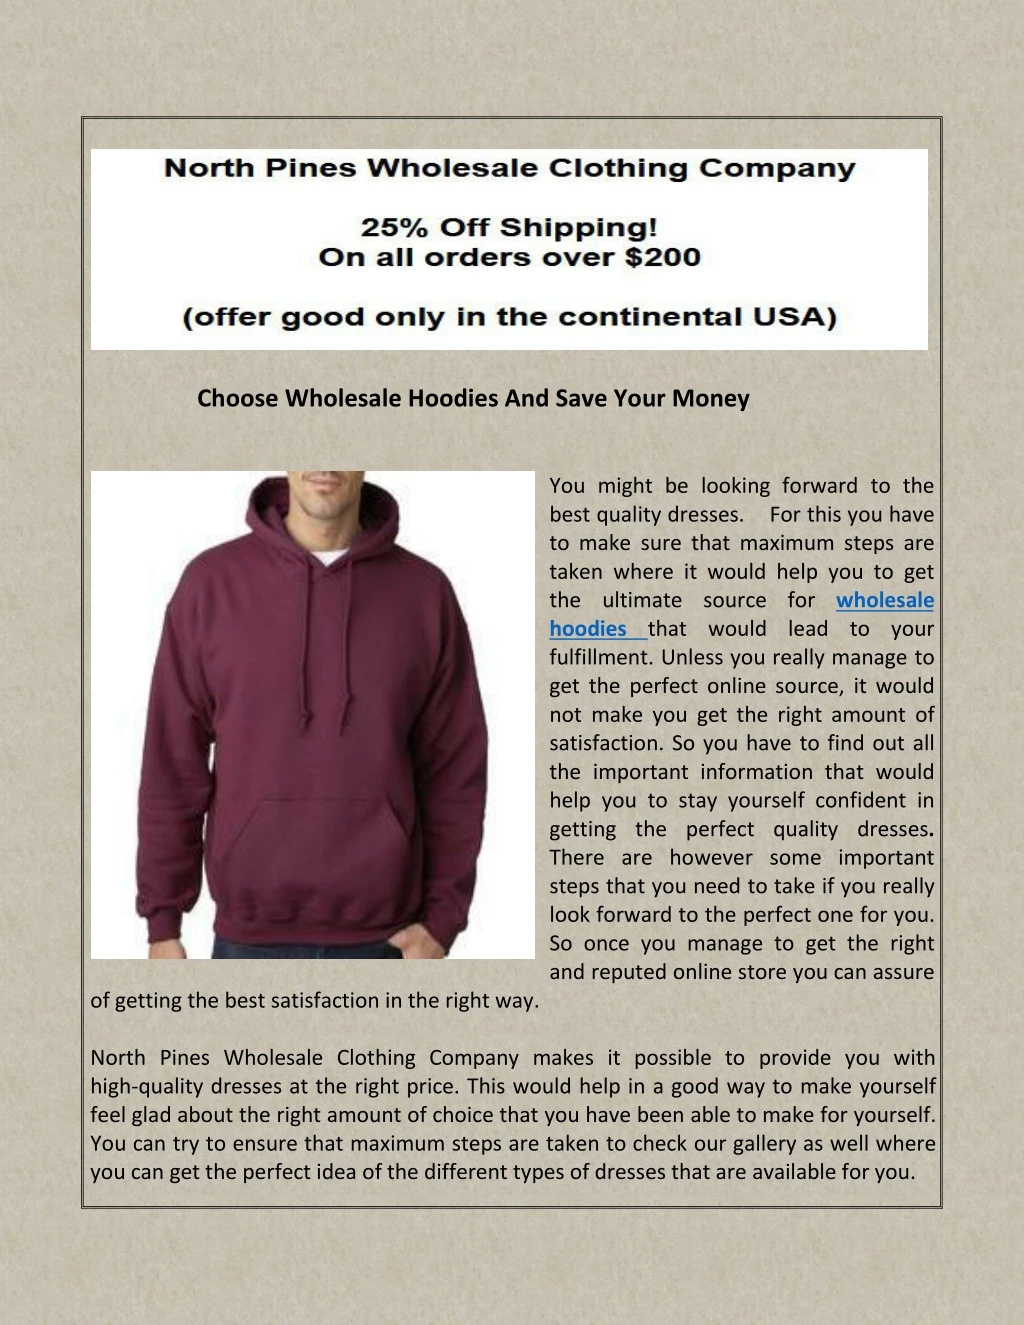 choose wholesale hoodies and save your money